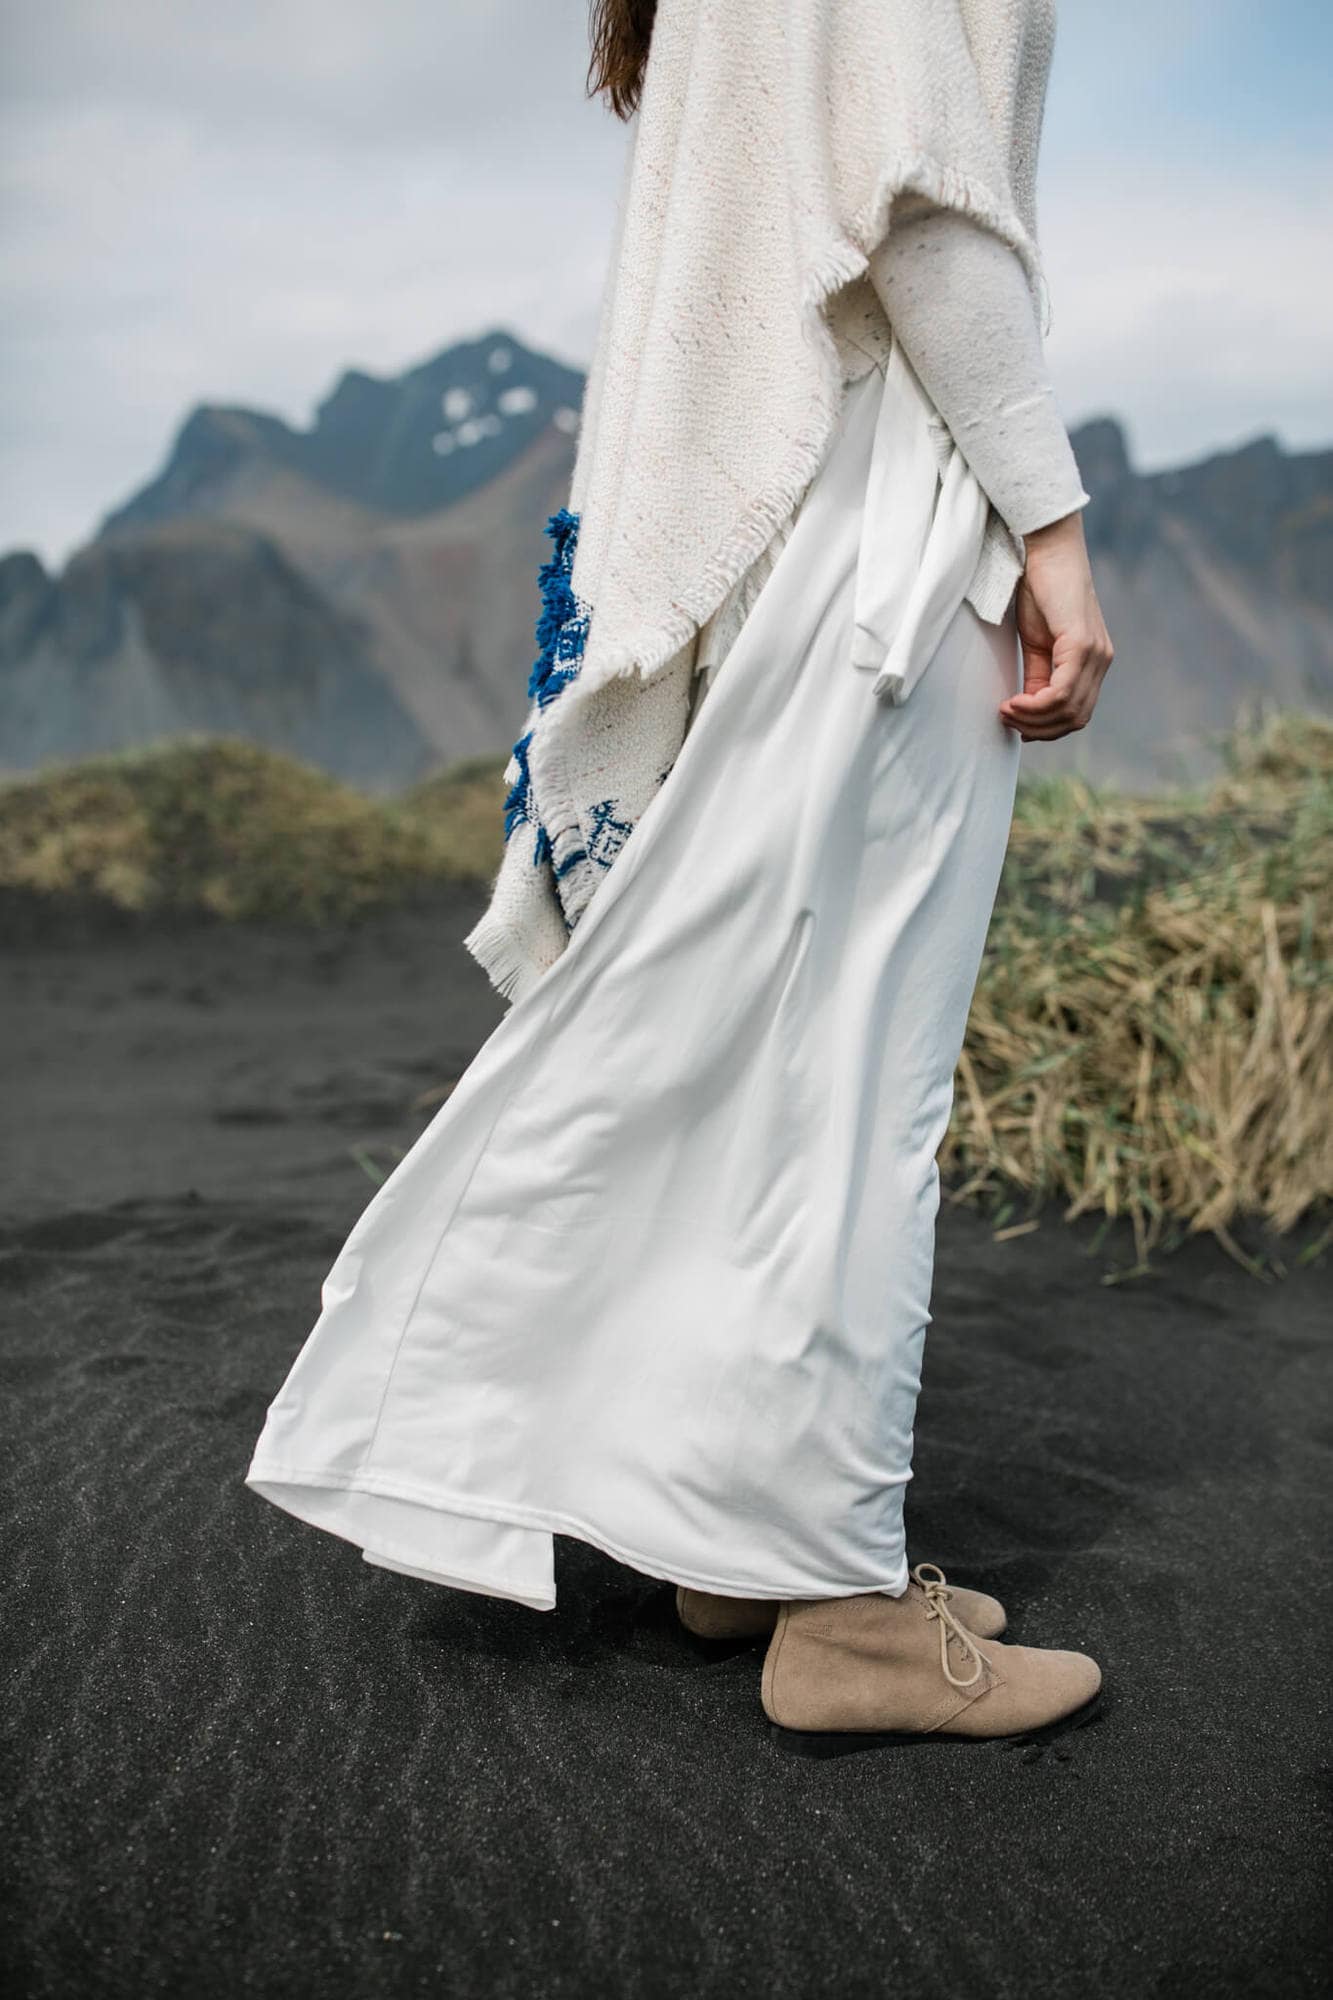 Details of iceland bride standing on a sand dune on a black sand beach.